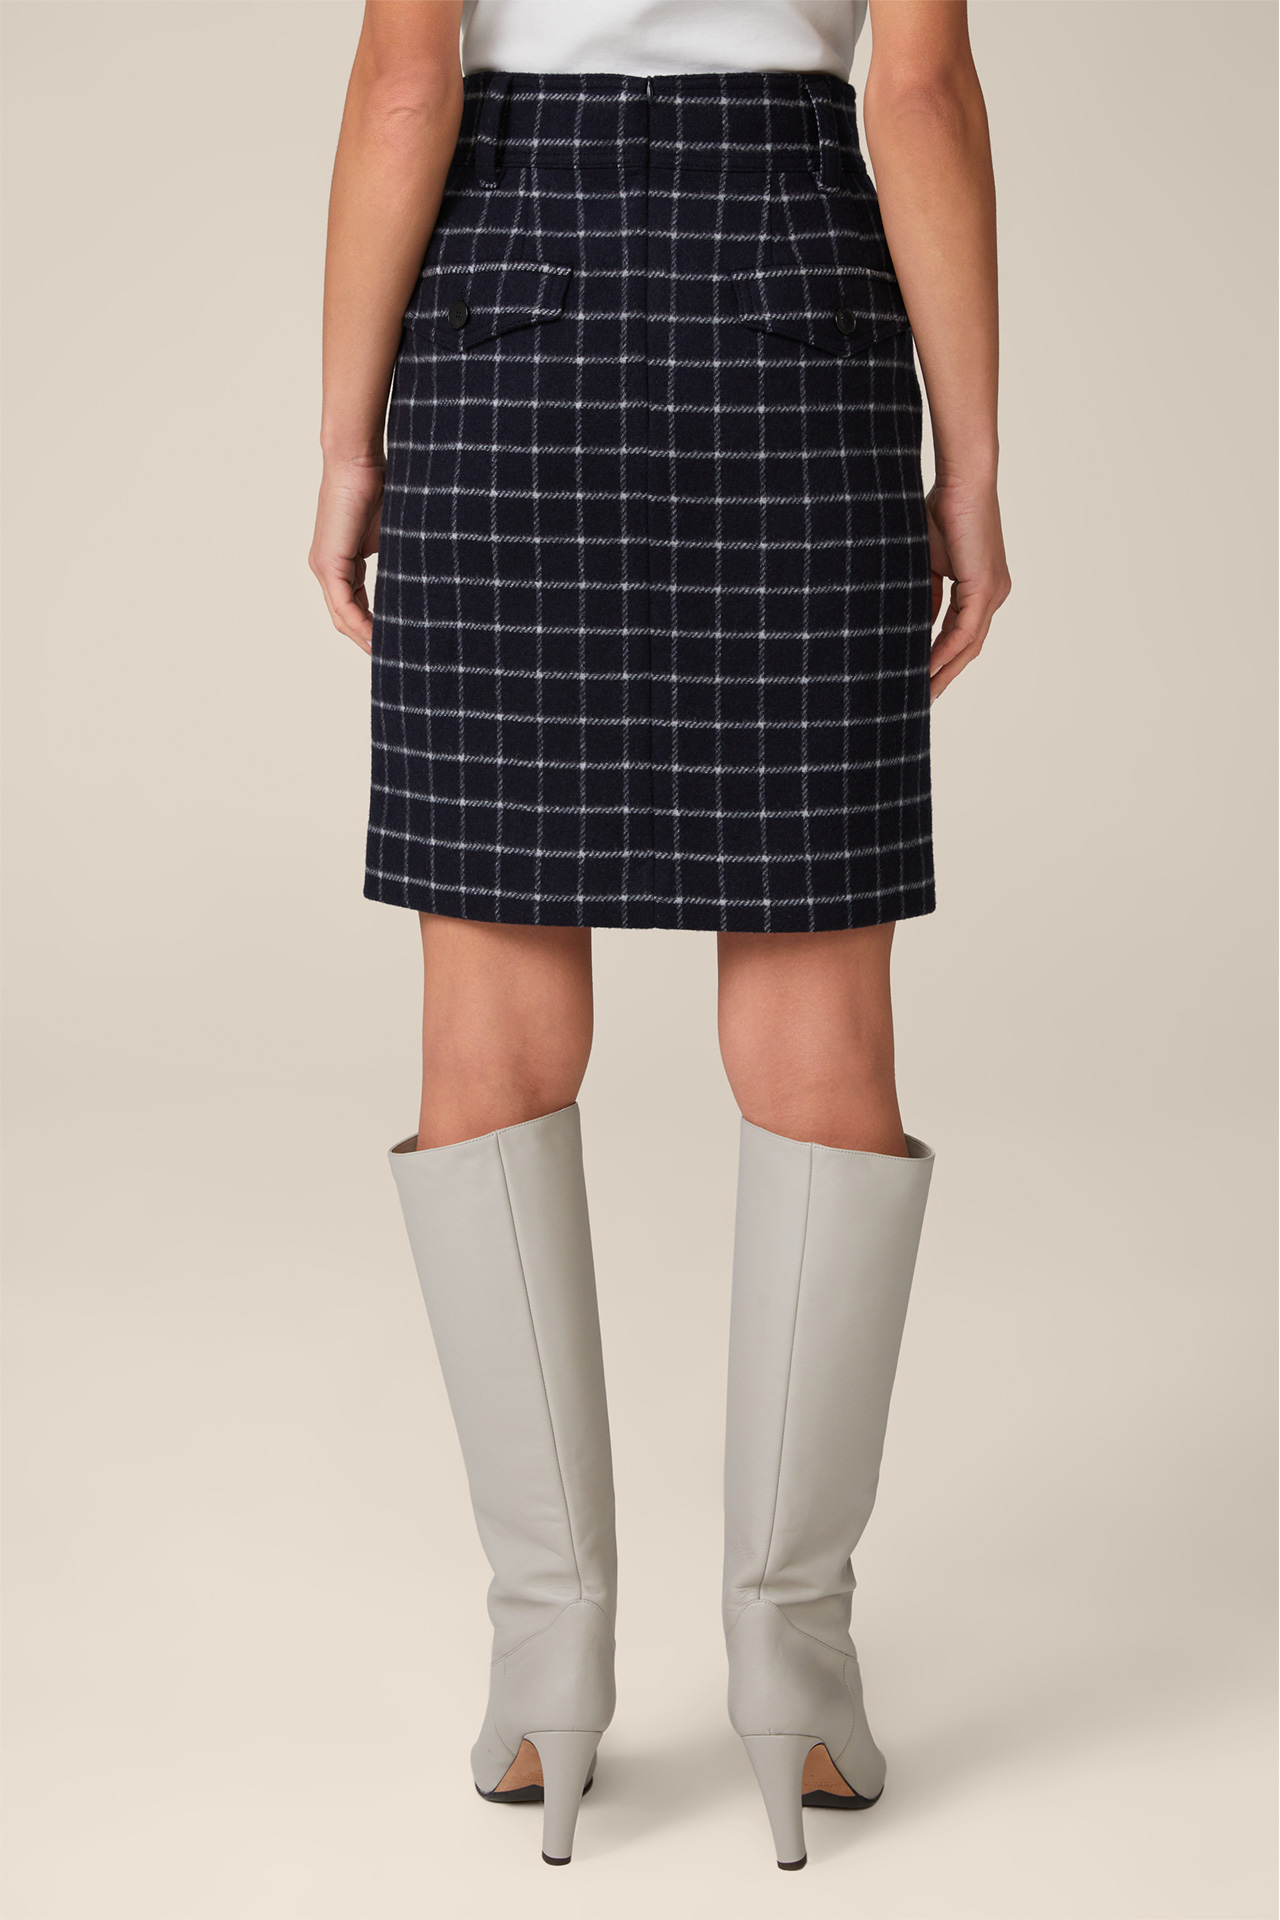 Wool Blend Boot Skirt in Navy and White Check